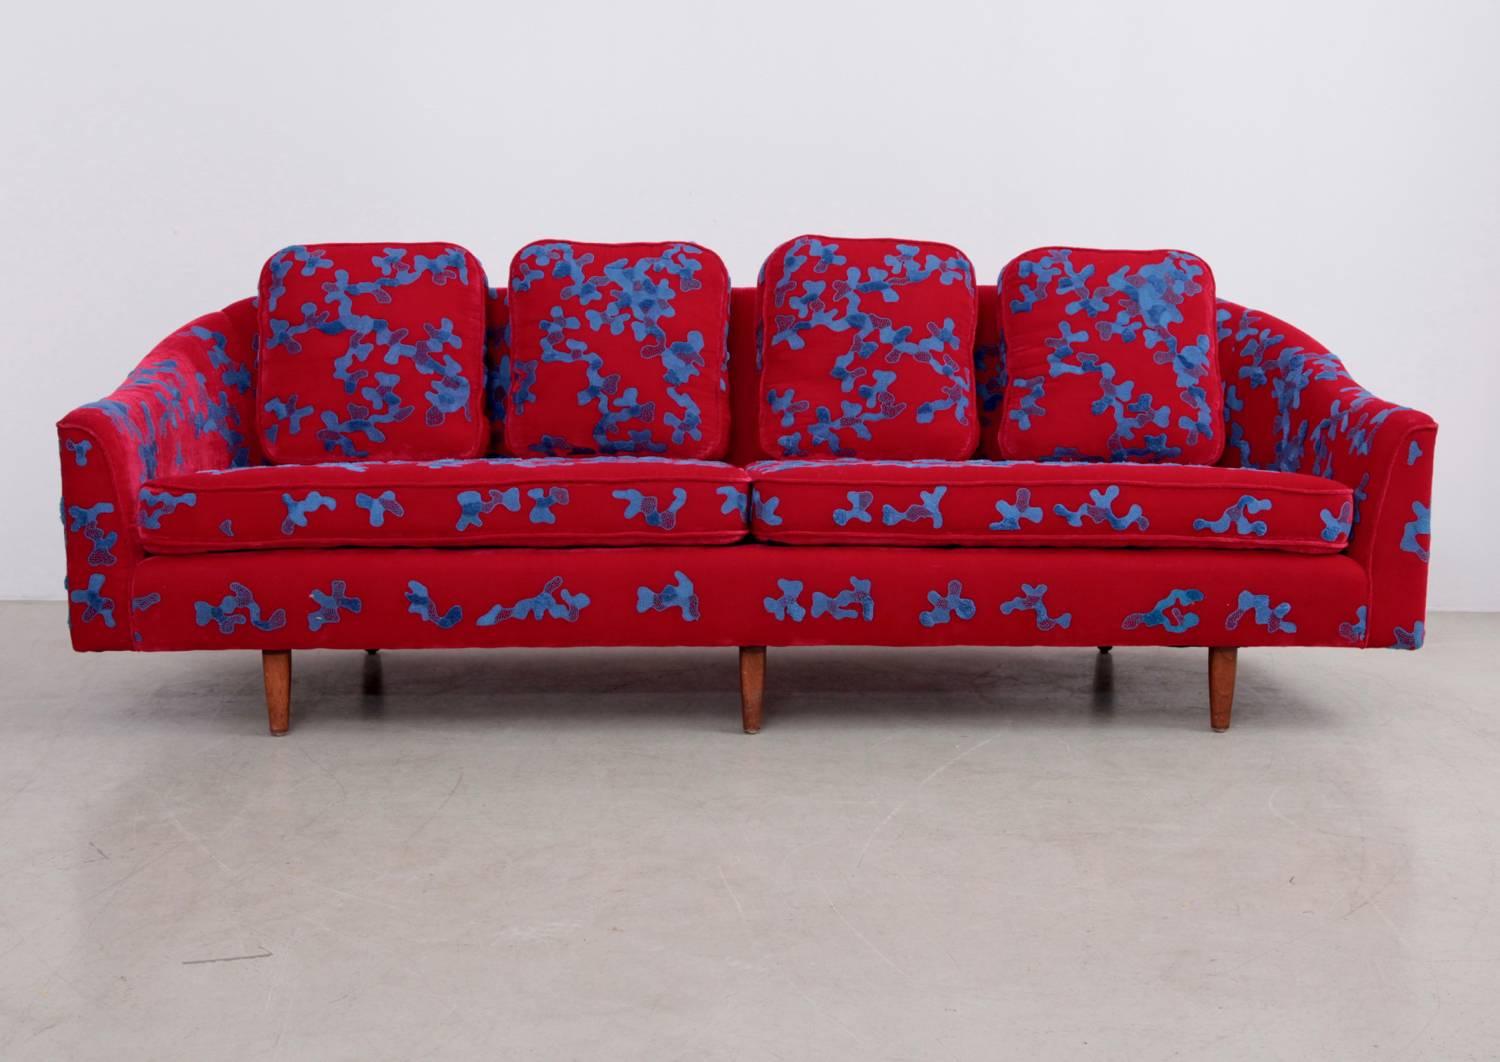 Hard to believe, that this art piece is completely hand embroidered by master artisans in India.
The superb color combination of sky blue cotton thread on the deep red silk velvet base fabric give this eye-catching vintage Harvey Probber sofa dated